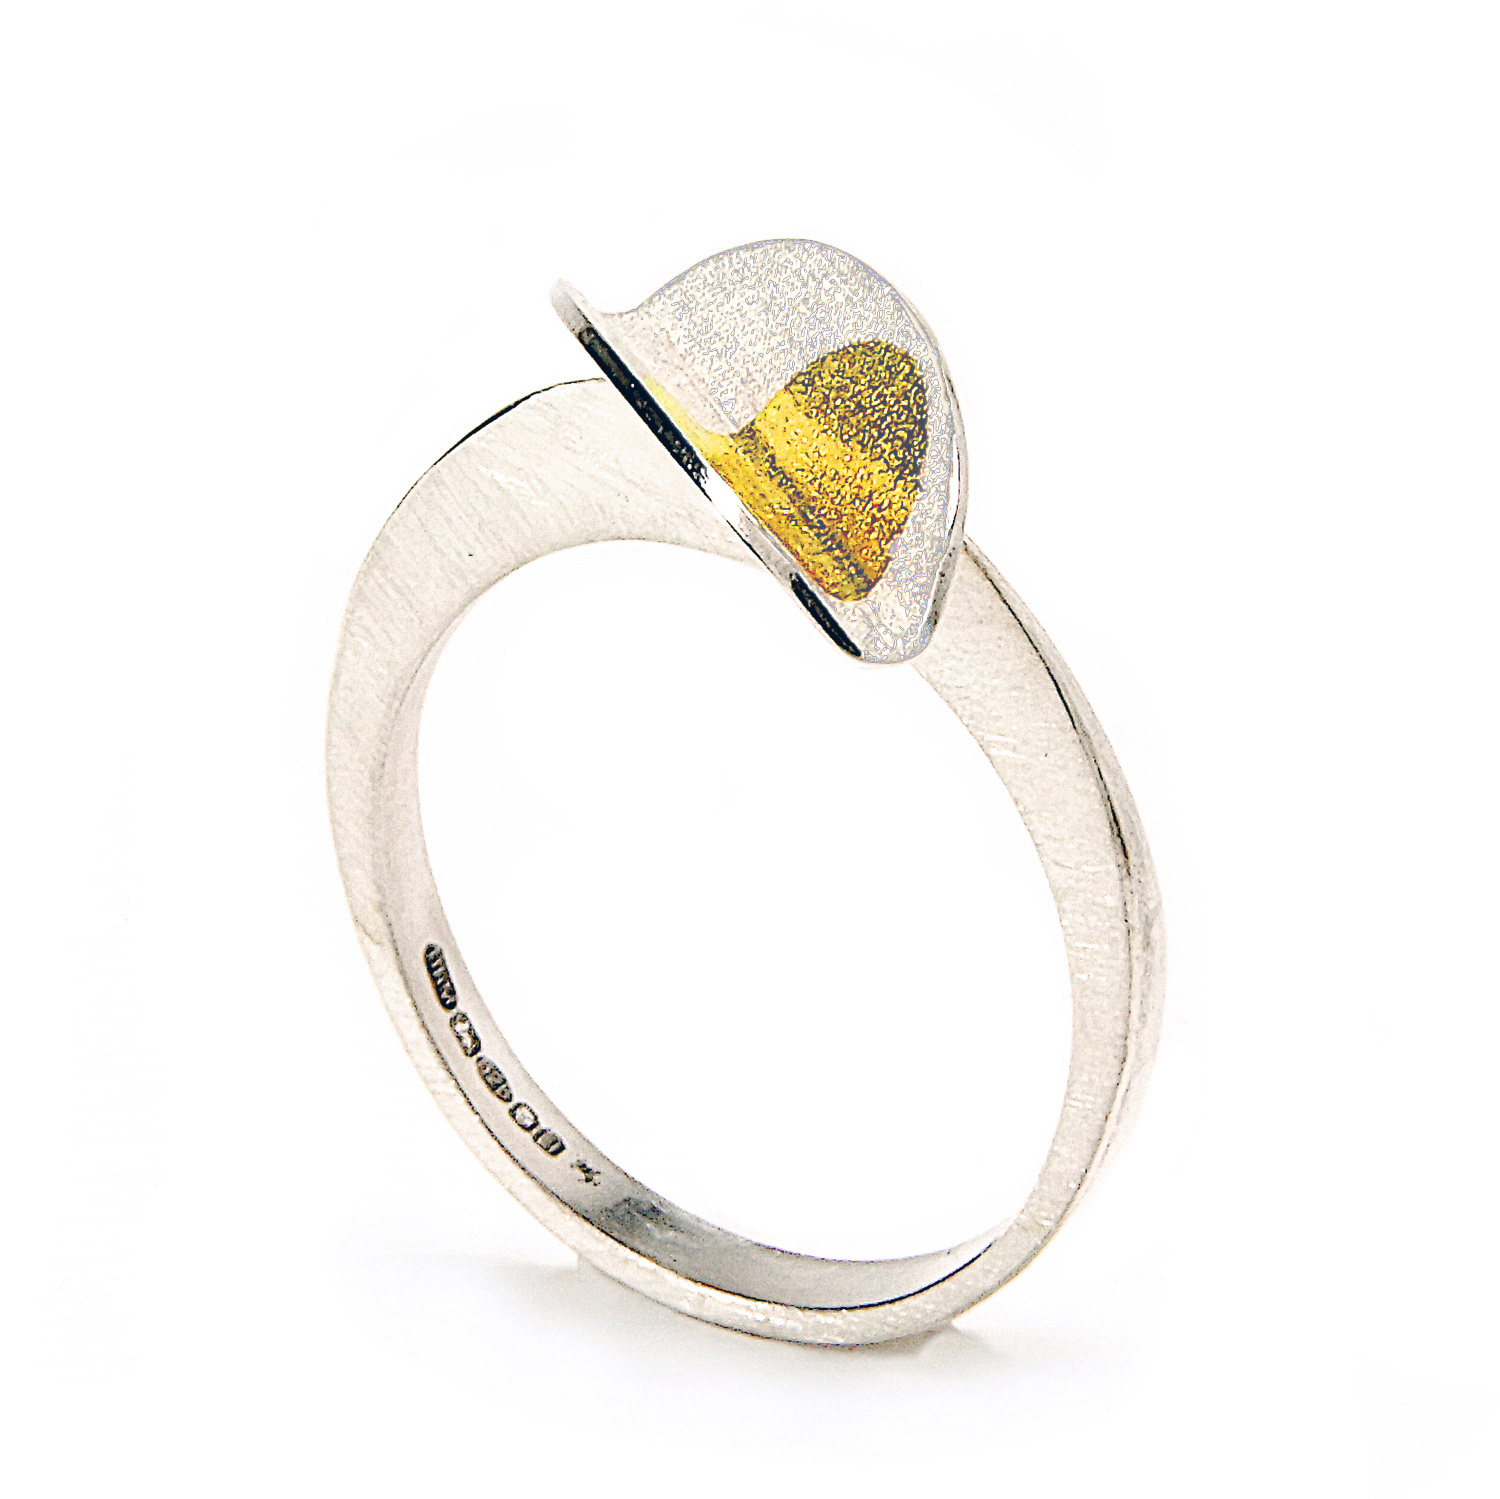 Ring, folded with gold circle by Hendrike Barz-Metzler